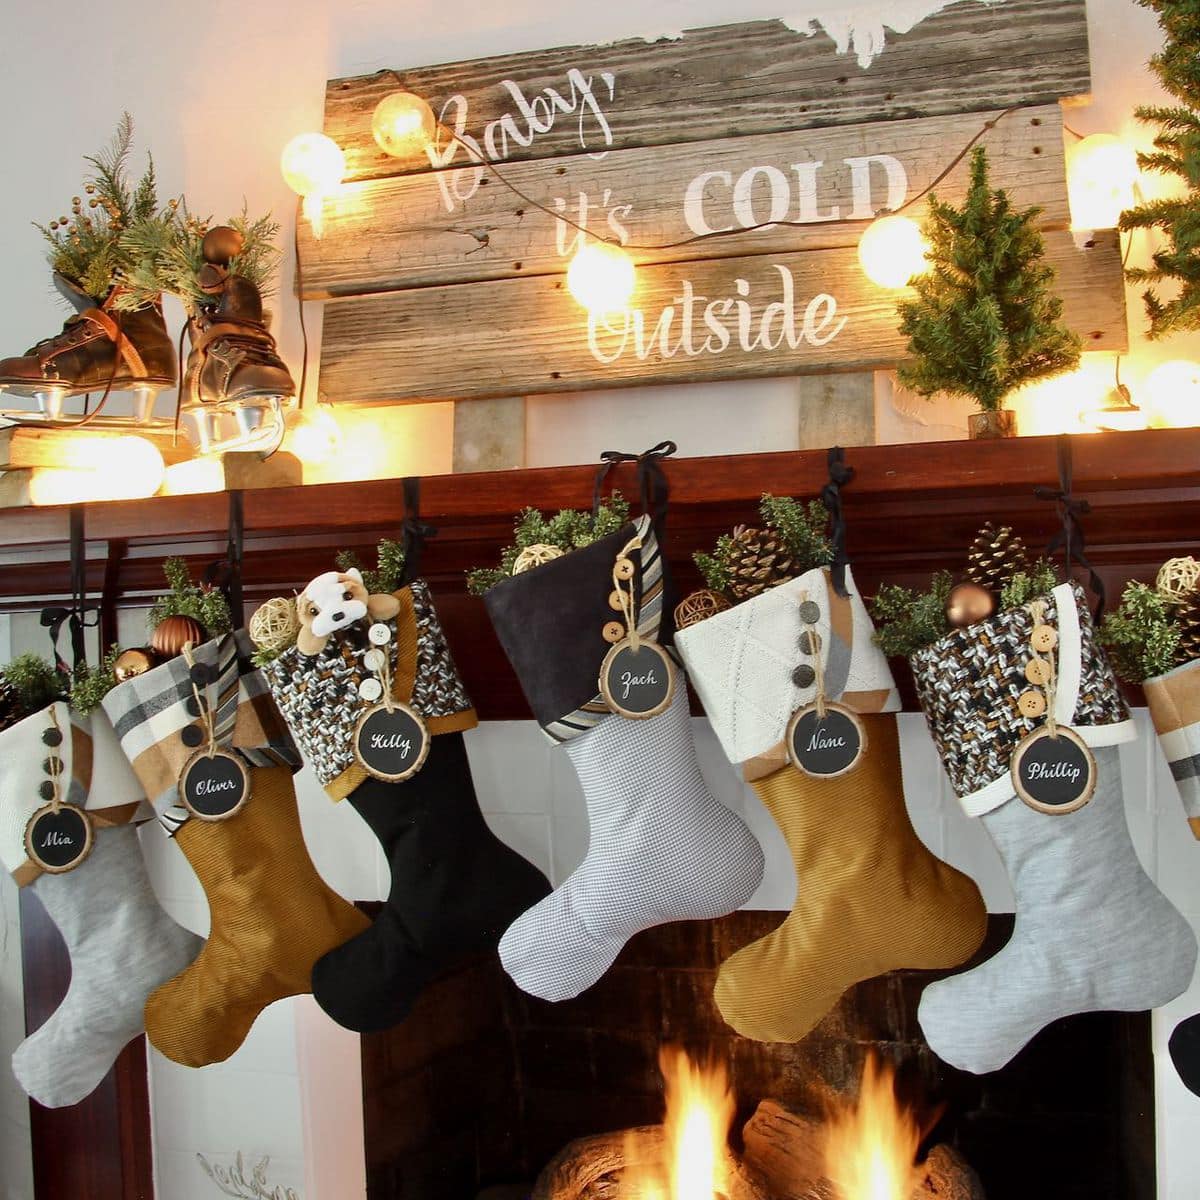 Full view of wood mantel with 7 Cozy Copper Christmas stockings hanging below and ice skates, snowball lights and a large reclaimed wood sign that says "Baby, it's cold outside